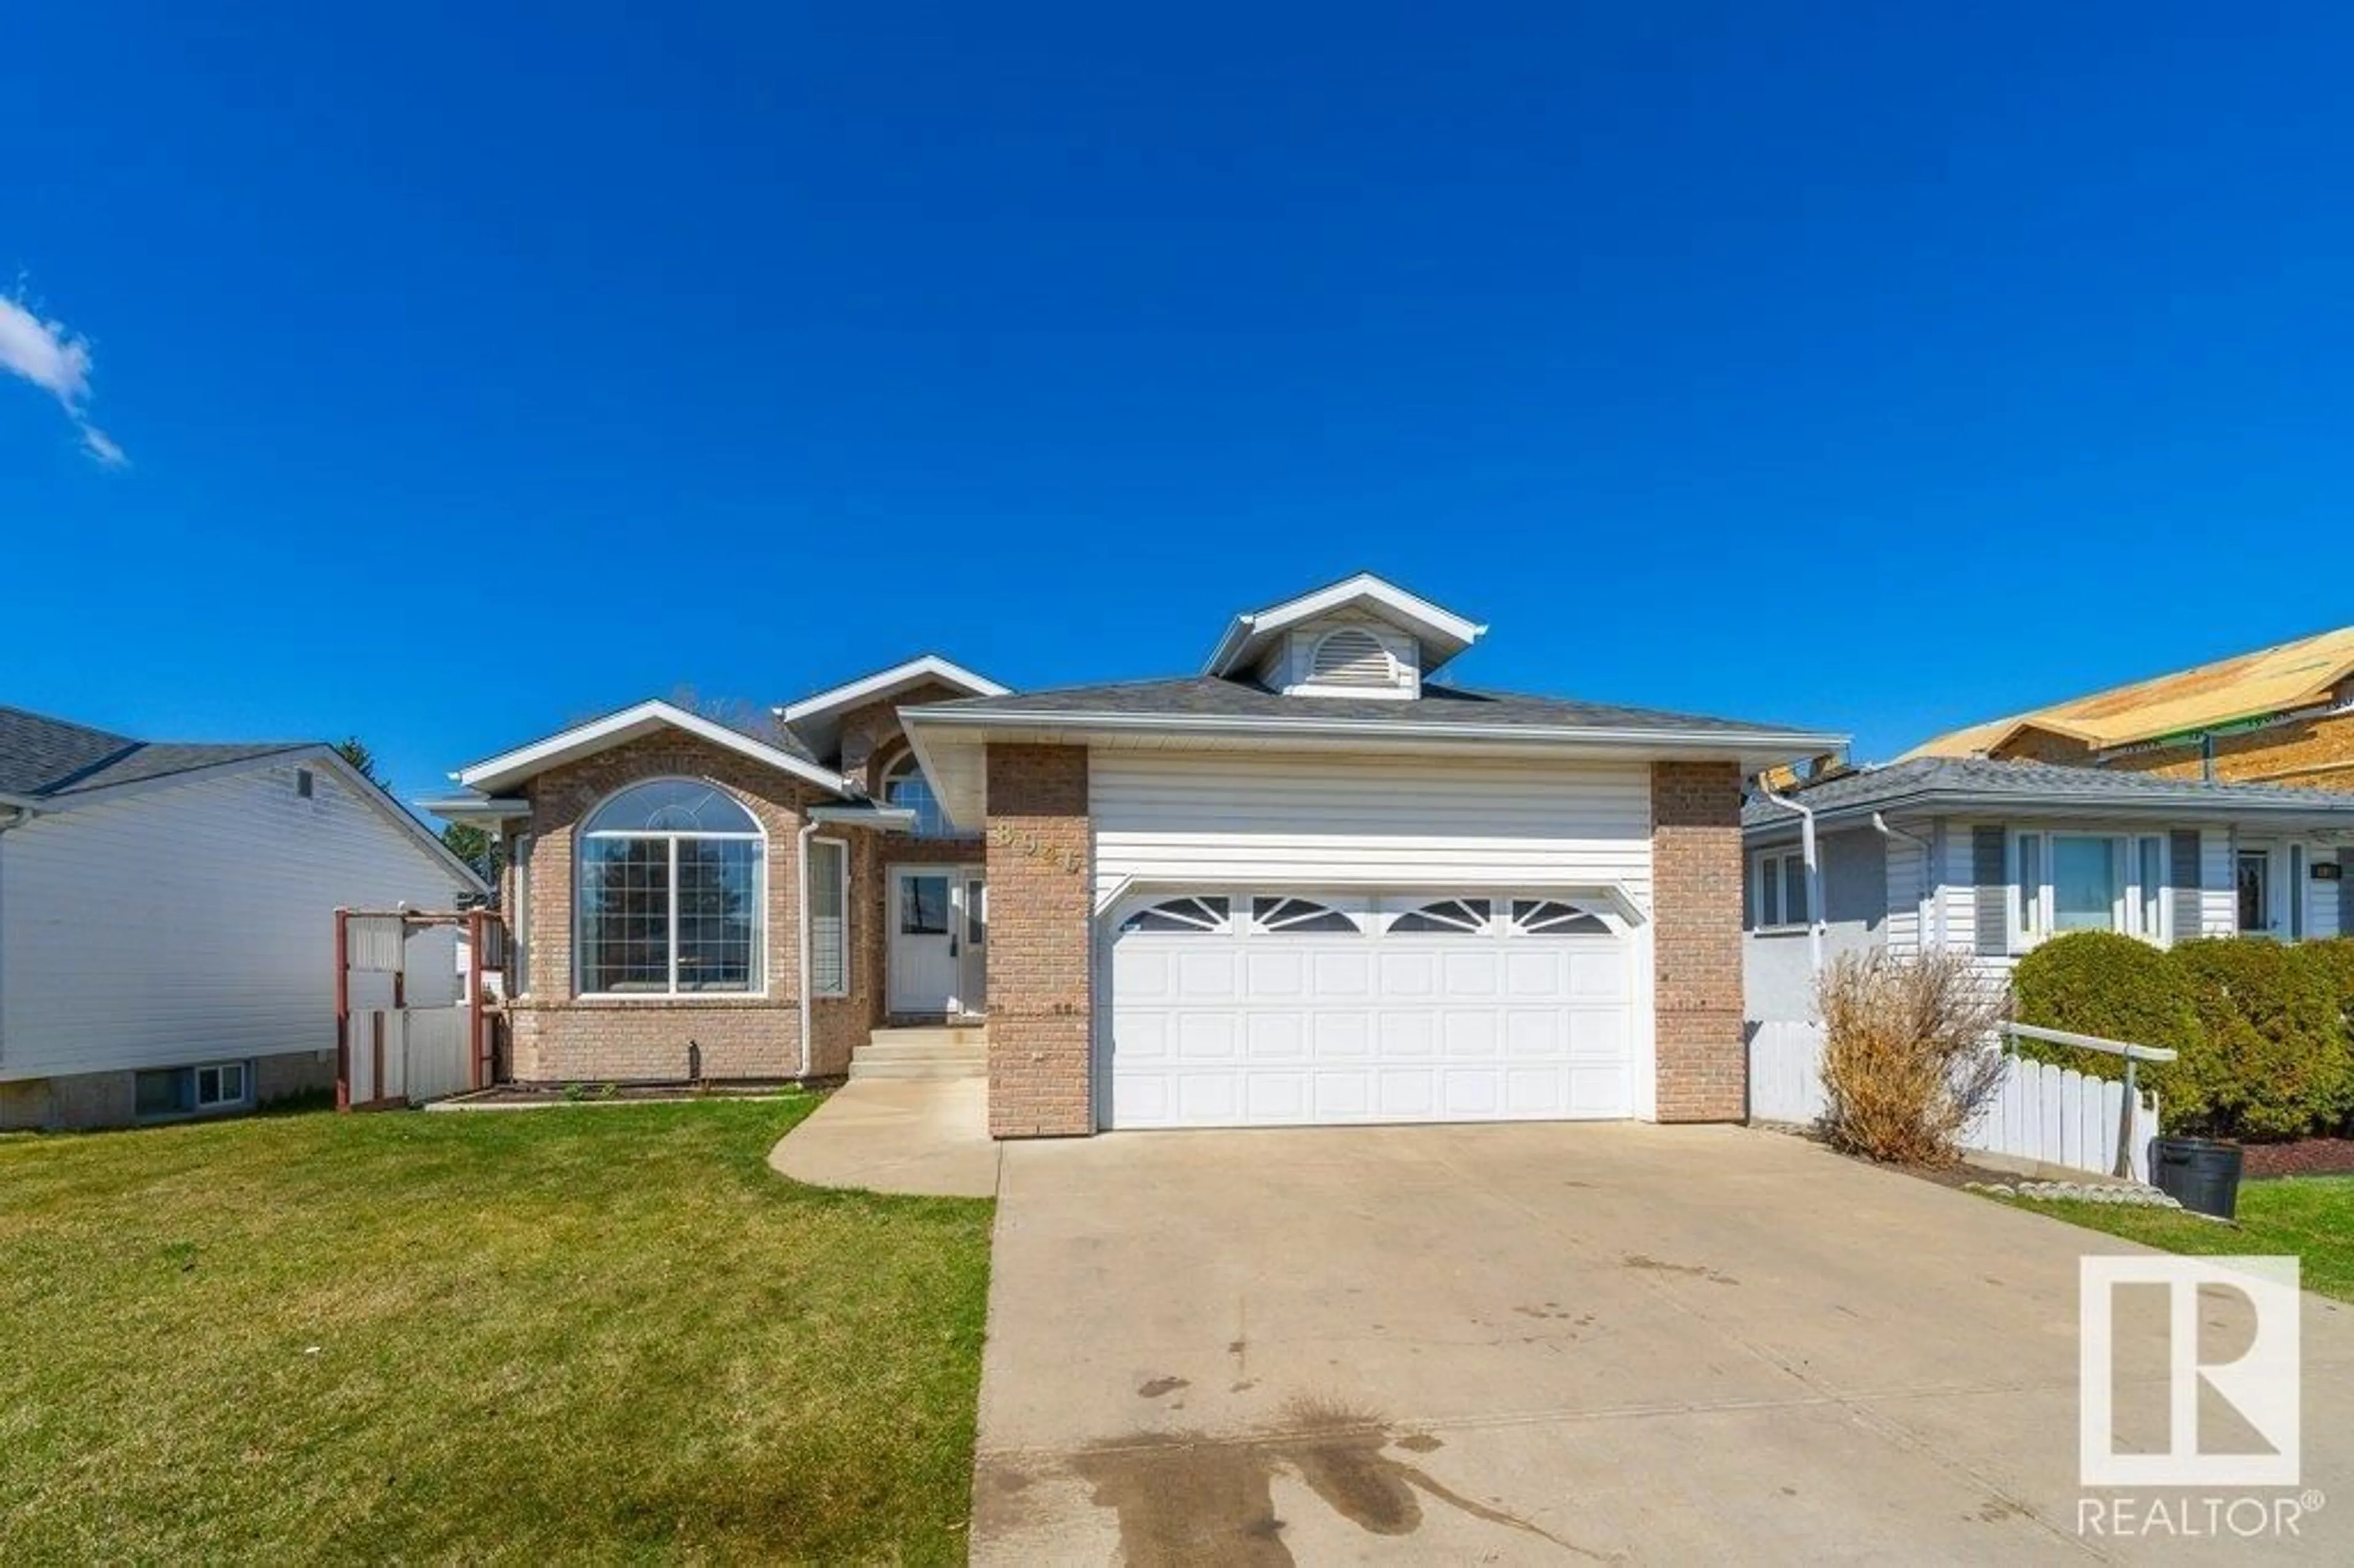 Frontside or backside of a home for 8946 154 ST NW, Edmonton Alberta T5R1S8